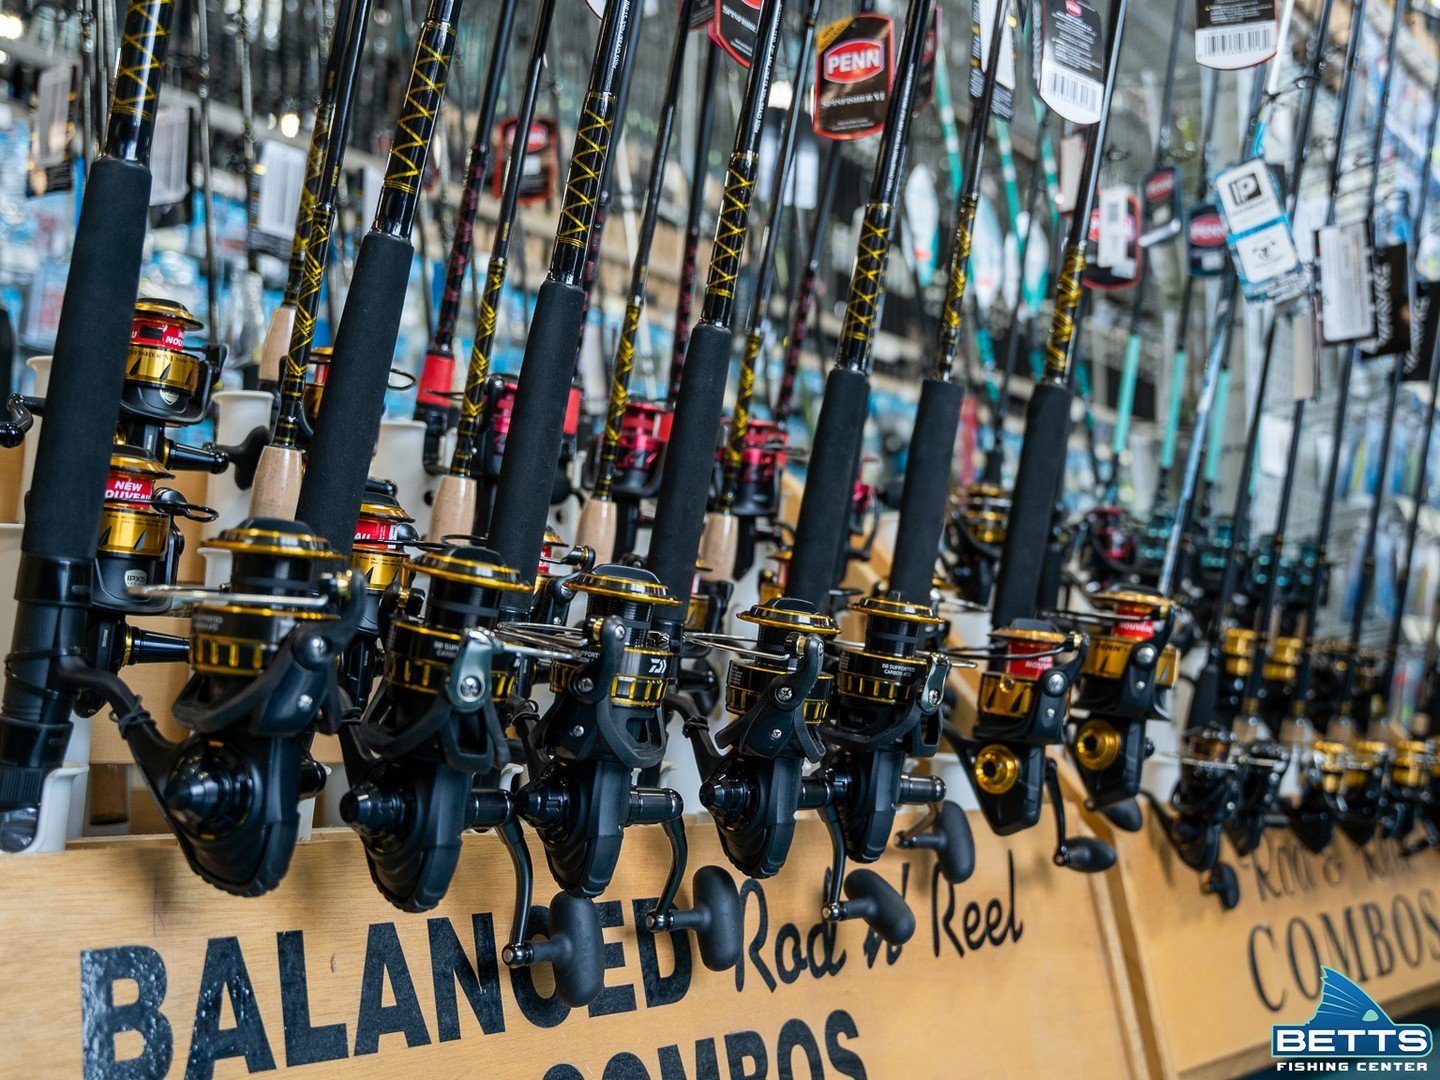 While our massive spring sale may have ended, the savings haven't stopped at Betts Fishing Center! Keep an eye on our social media channels and website to snag incredible deals on gear throughout the year. Don't miss out on our upcoming sales &ndash;